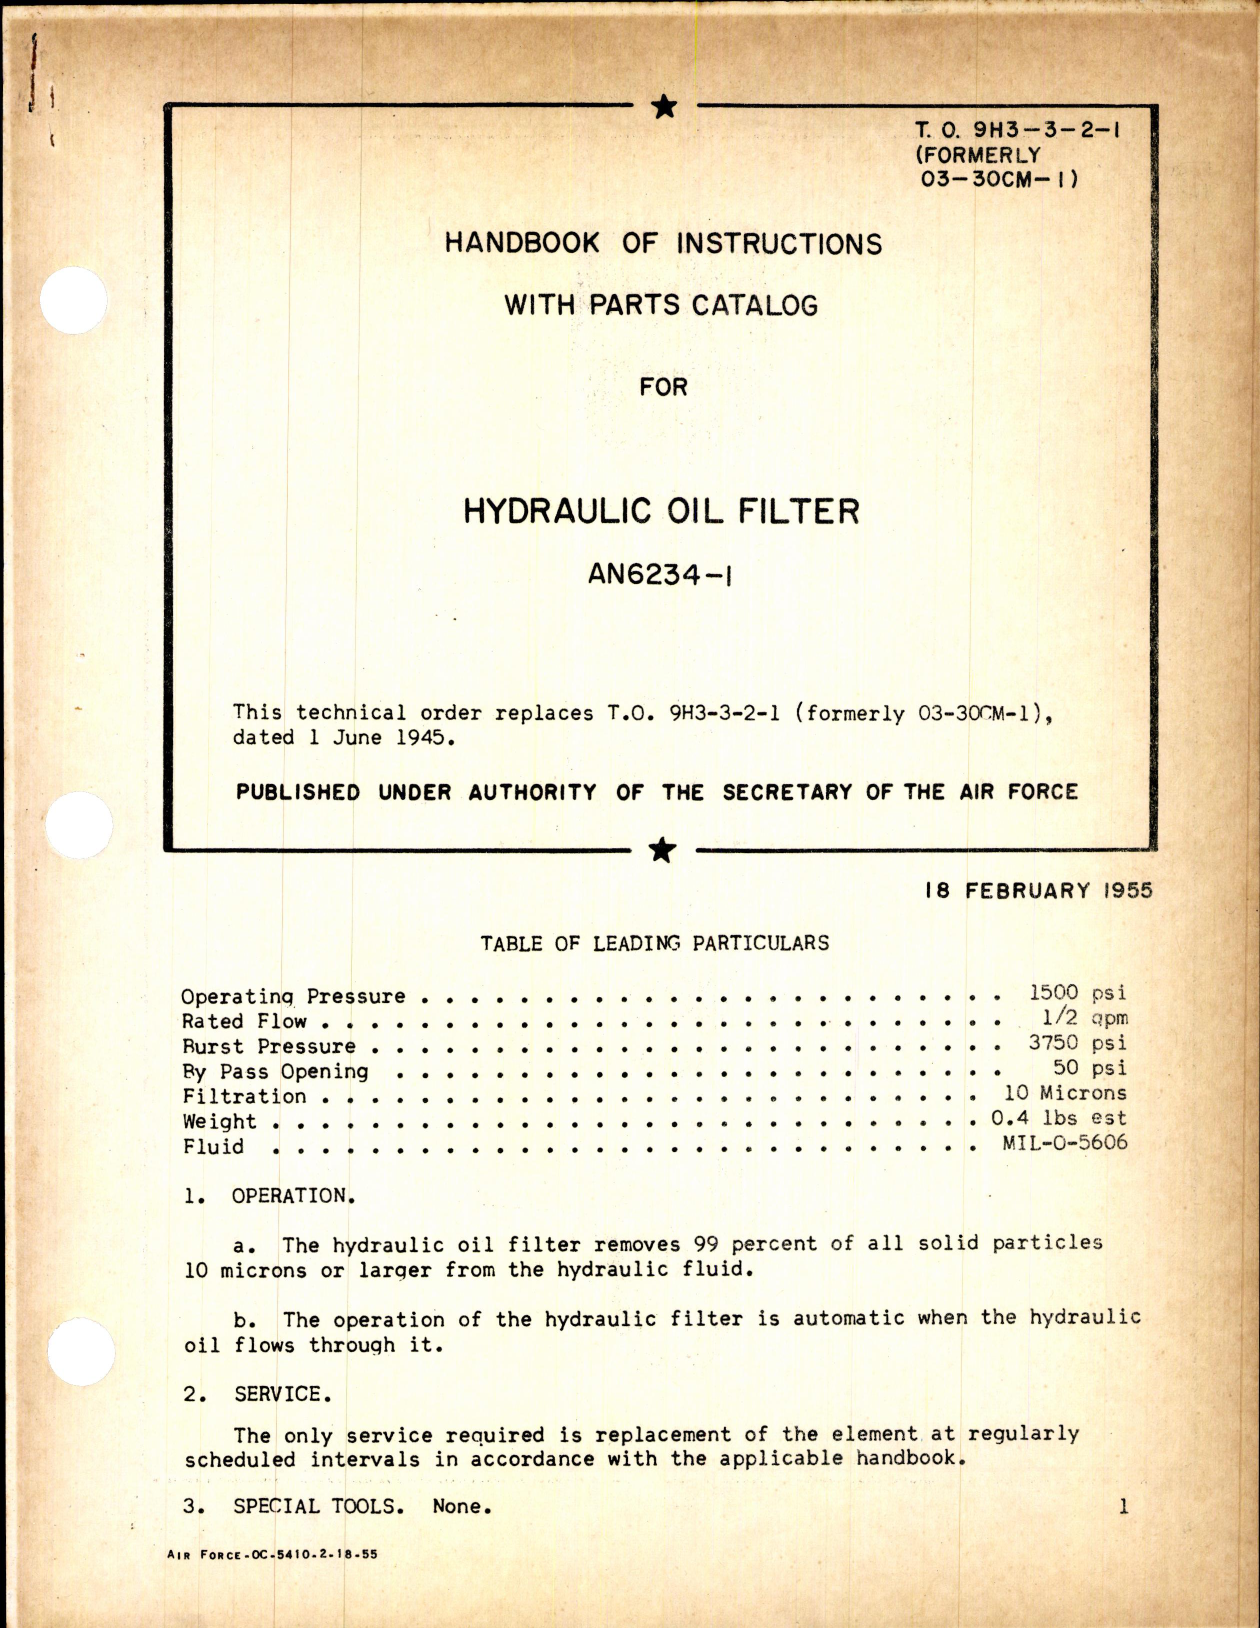 Sample page 1 from AirCorps Library document: Instructions w PC for Hydraulic Oil Filter AN6234-1